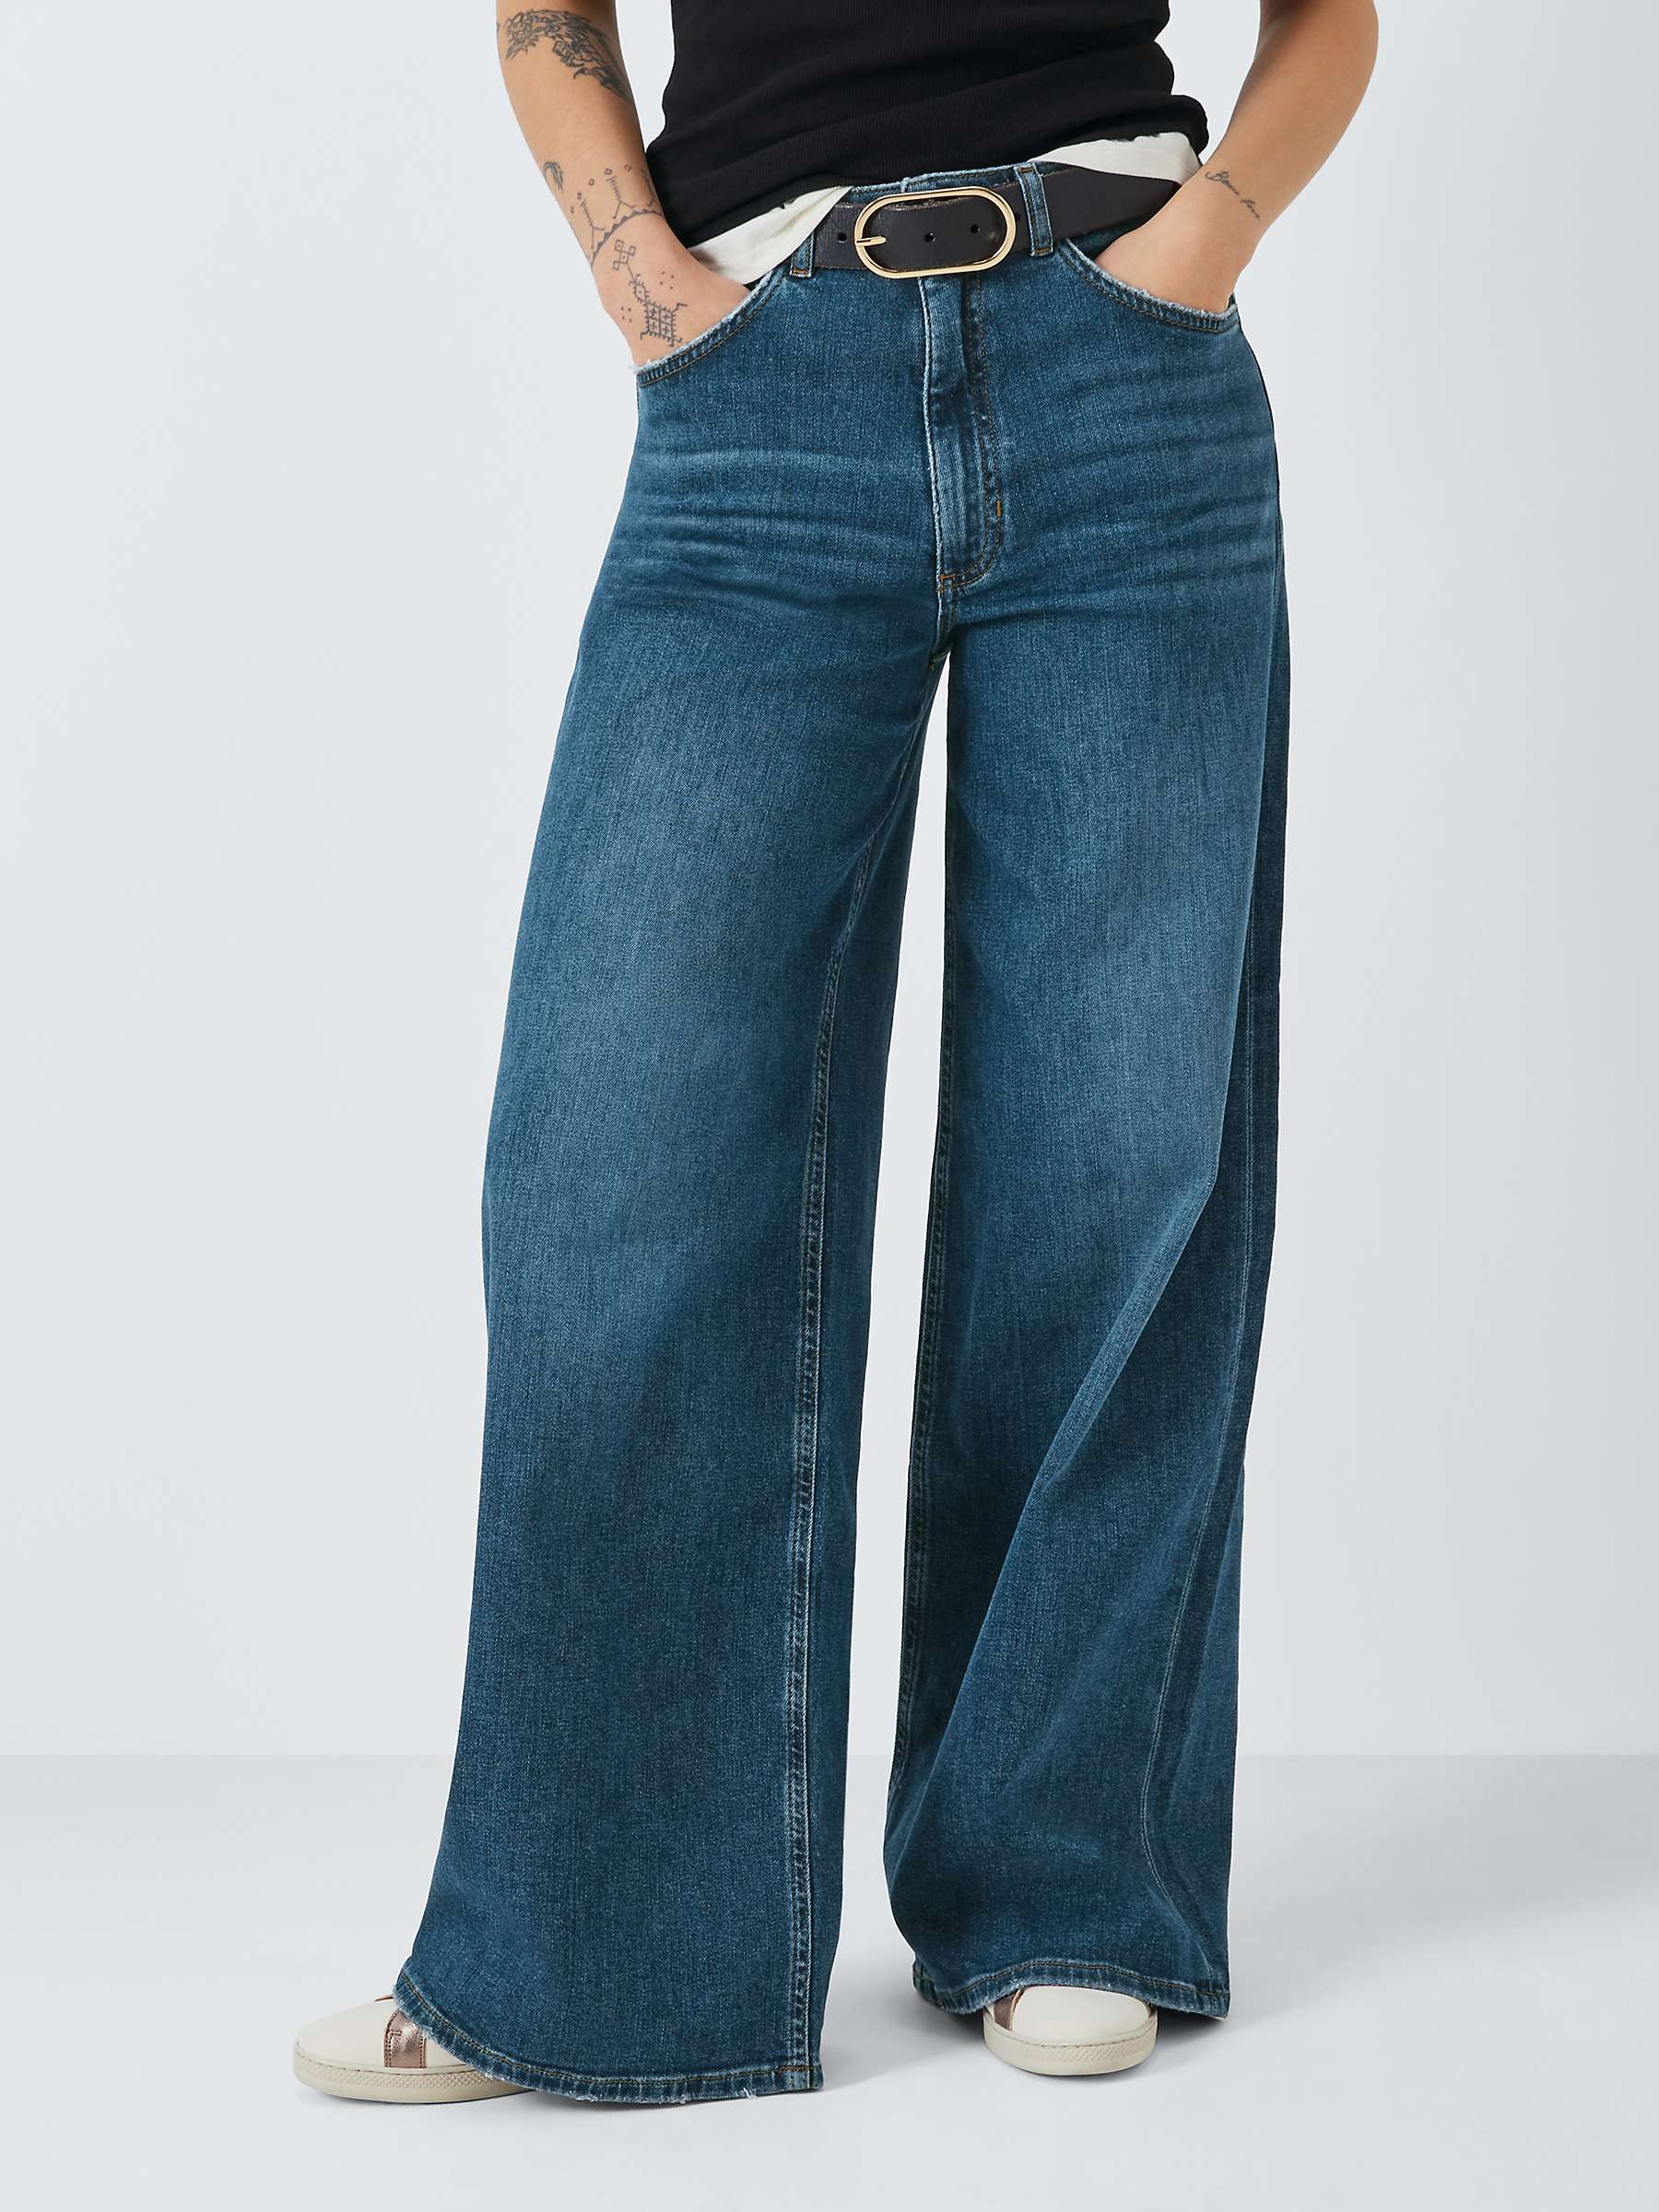 Buy AND/OR Westlake High Rise Wide Leg Jeans, Blue Horizon Online at johnlewis.com